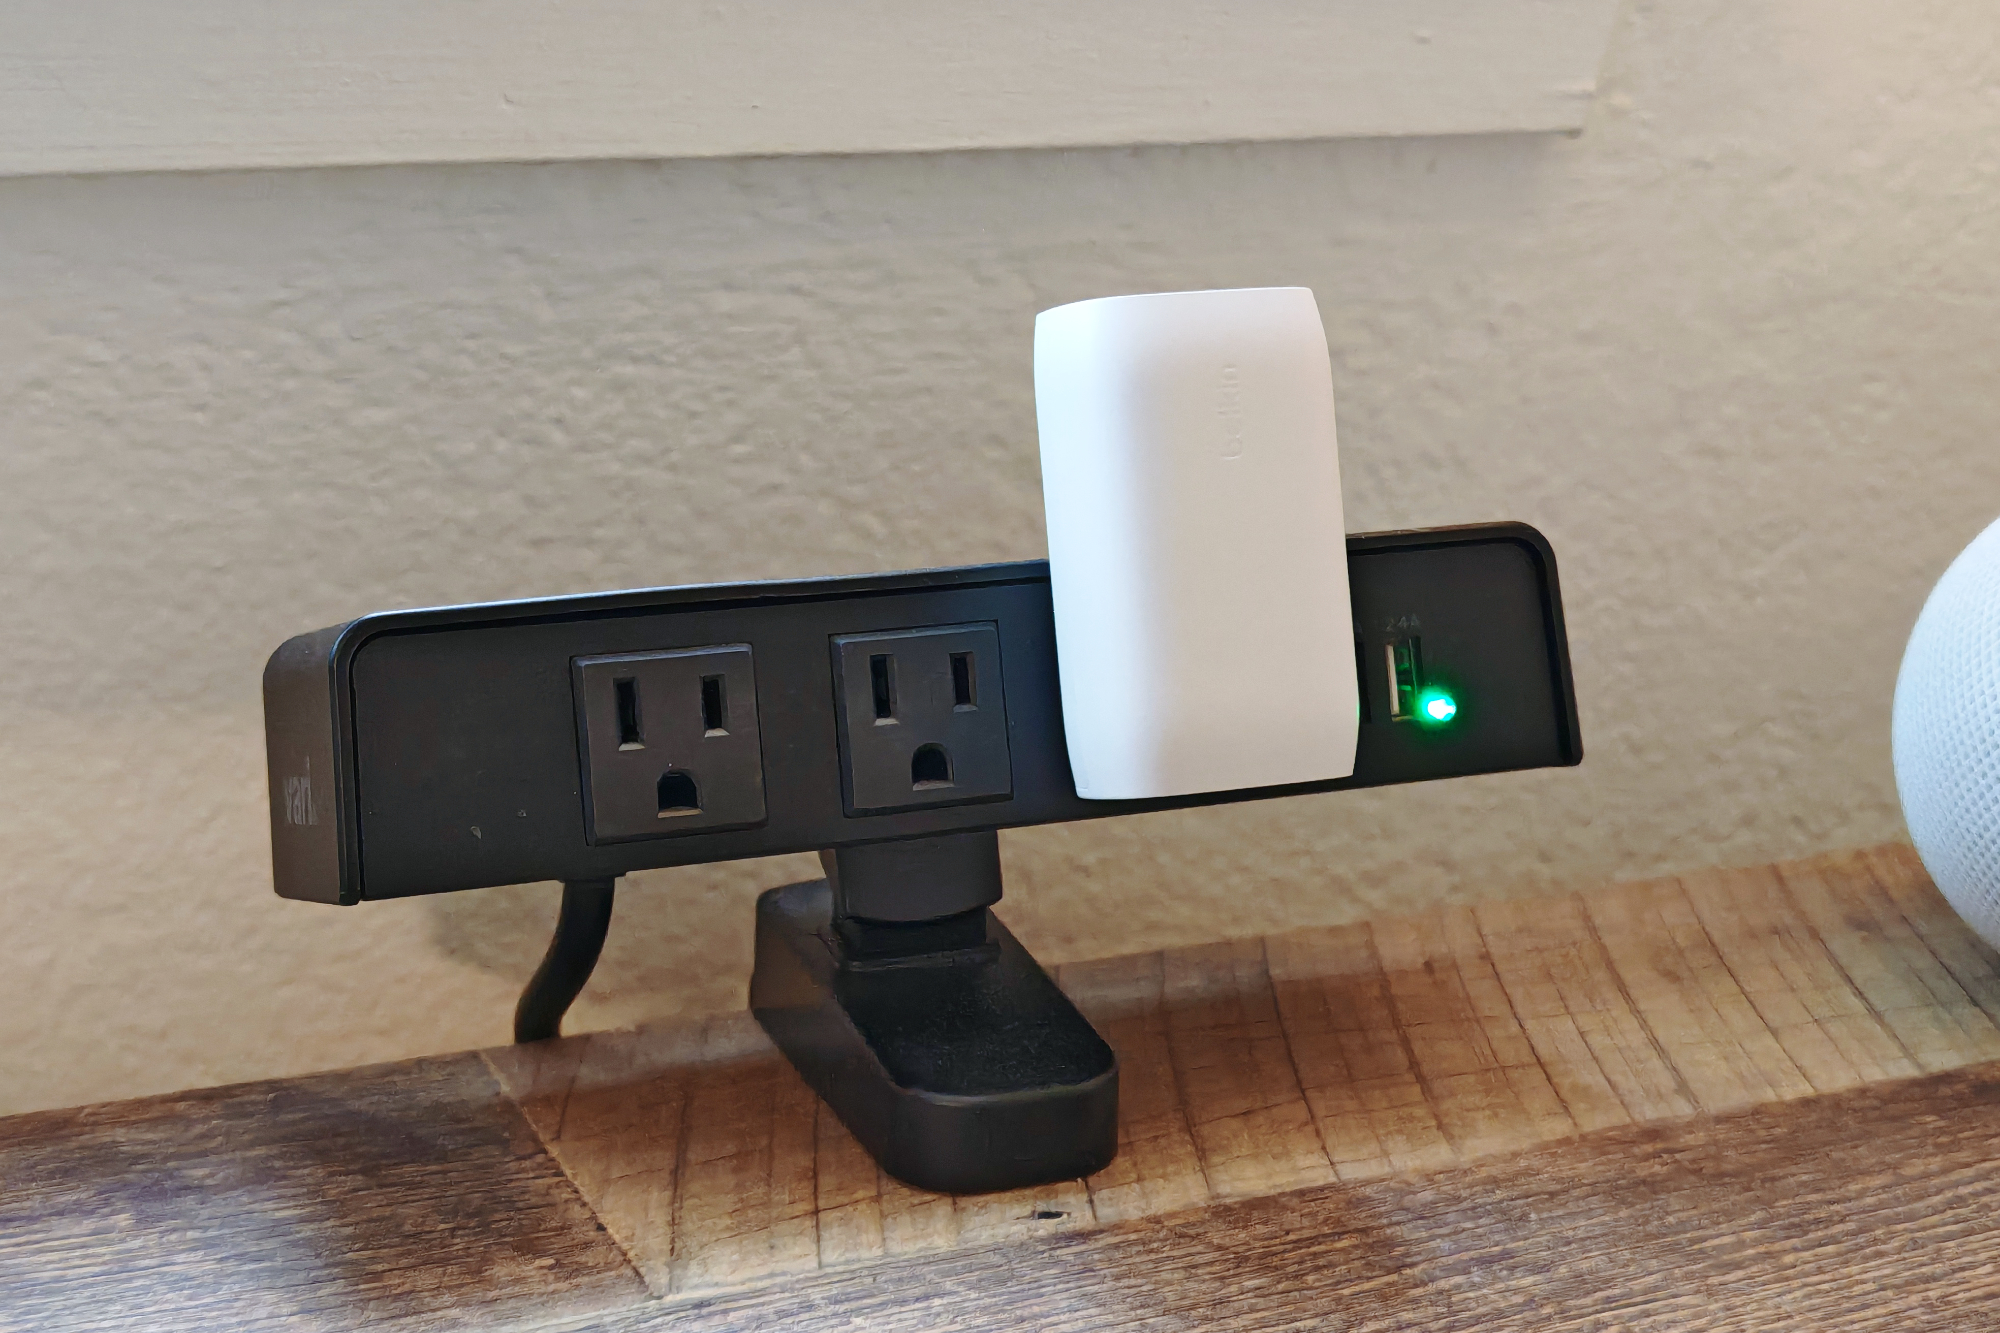 A white Belkin charger plugged into an outlet on a desk.